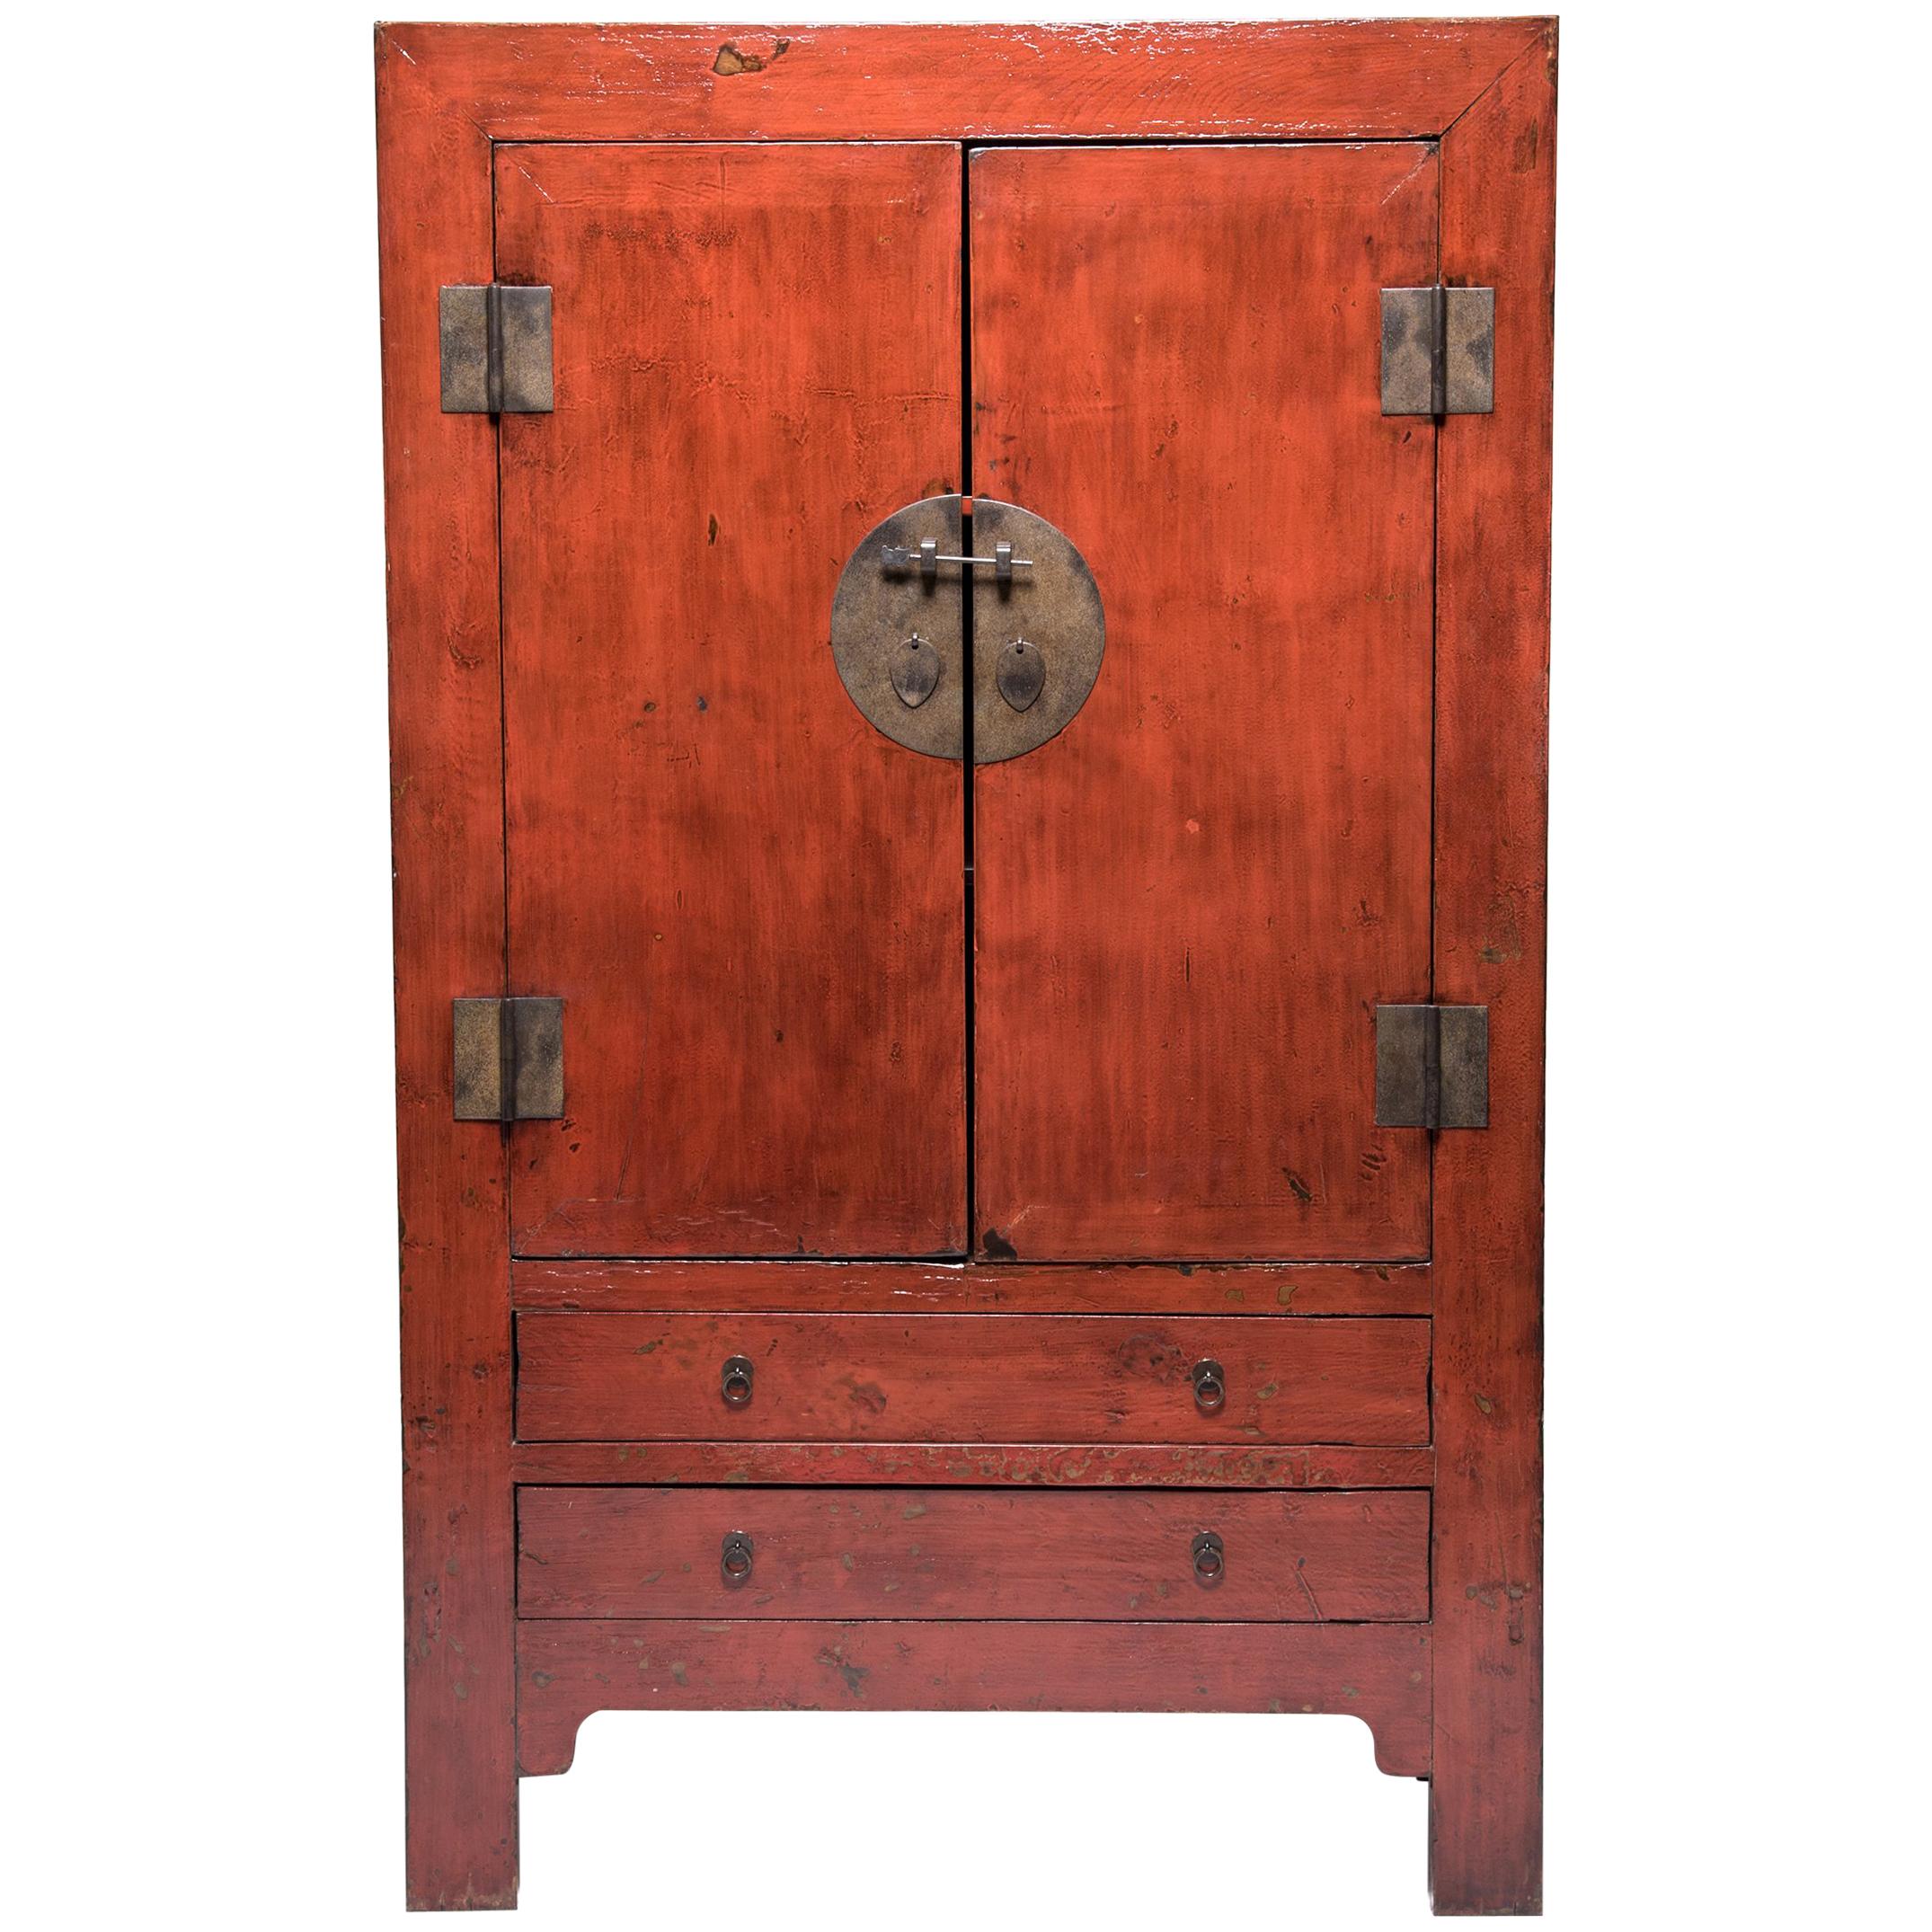 Chinese Tall Lacquered Dowry Cabinet